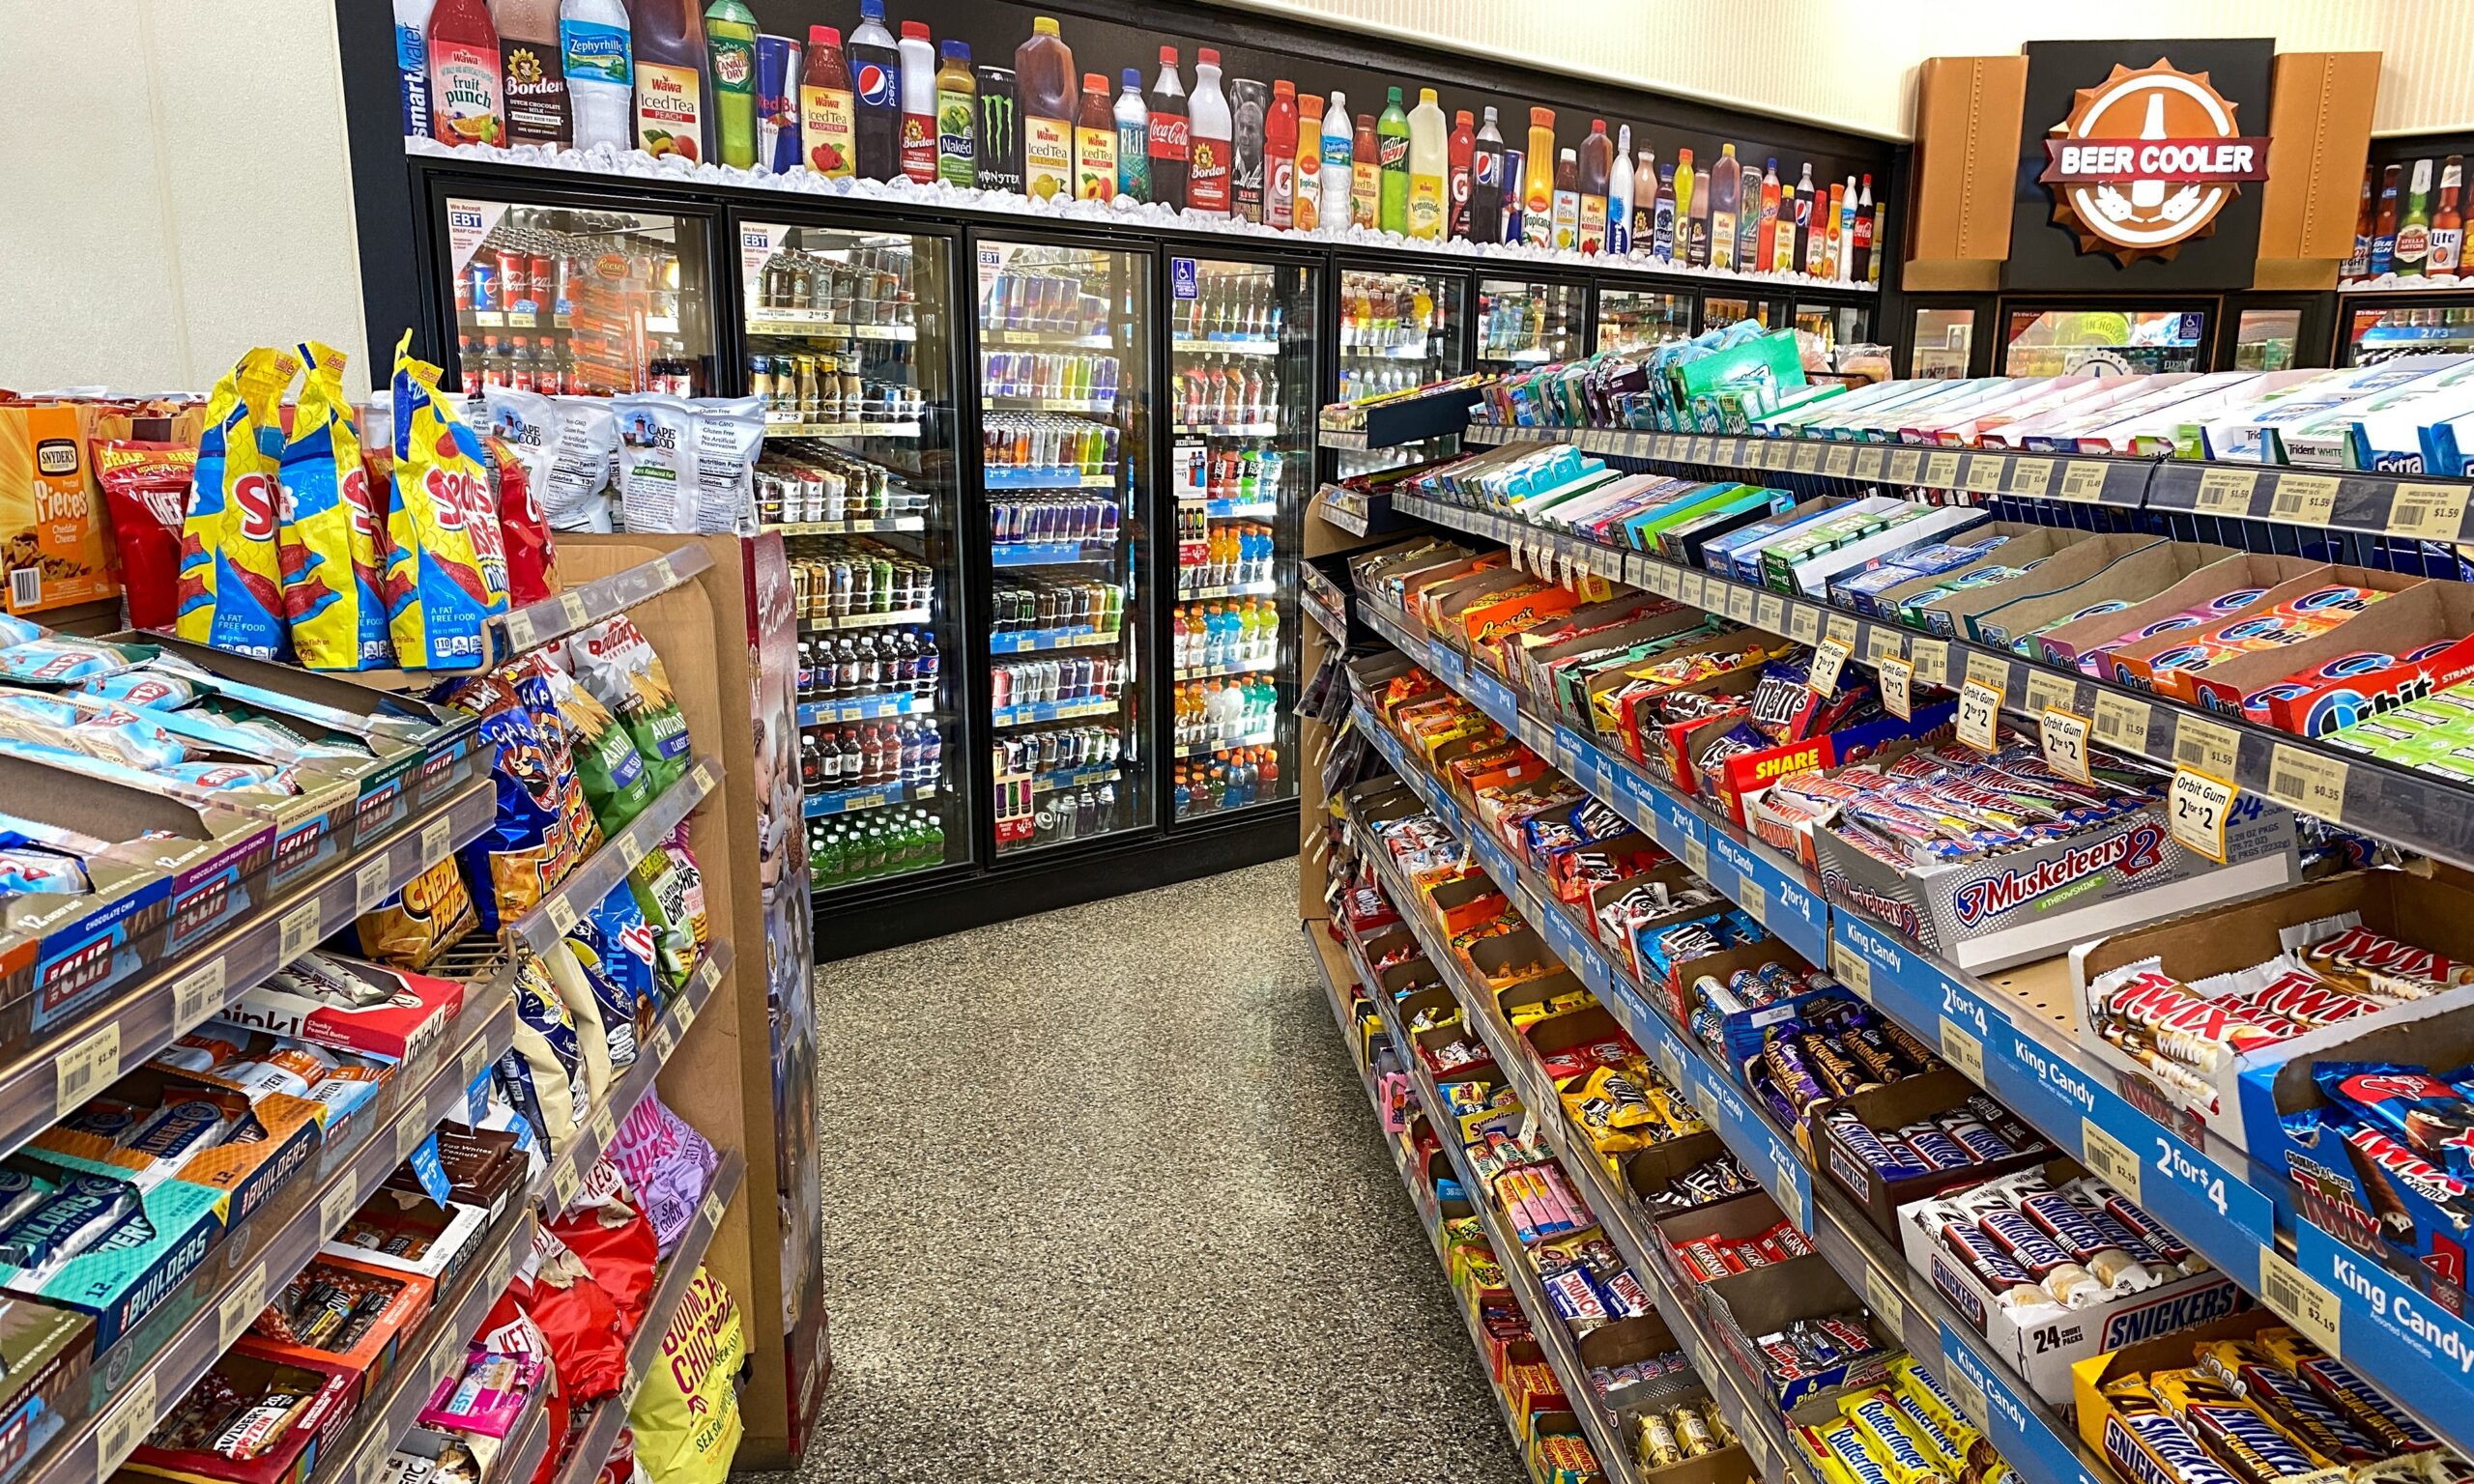 A photo of an aisle of a convenience store - the background is a cold case with soft drinks and beer.